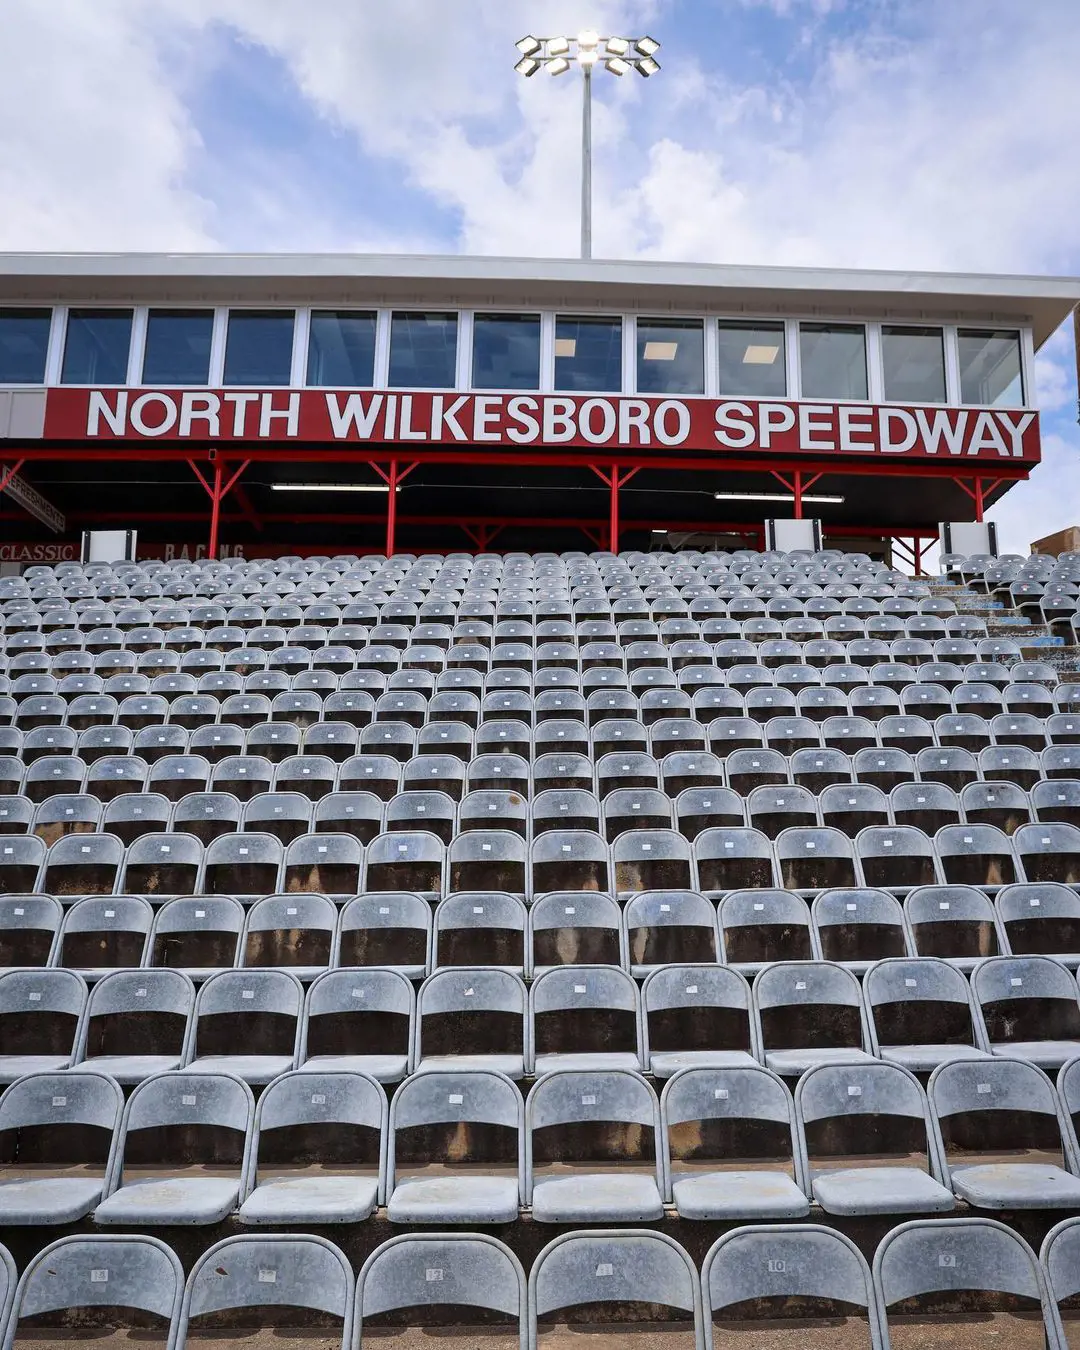 North Wilkesboro Speedway days before the NASCAR All-Star race  on May 14, 2023